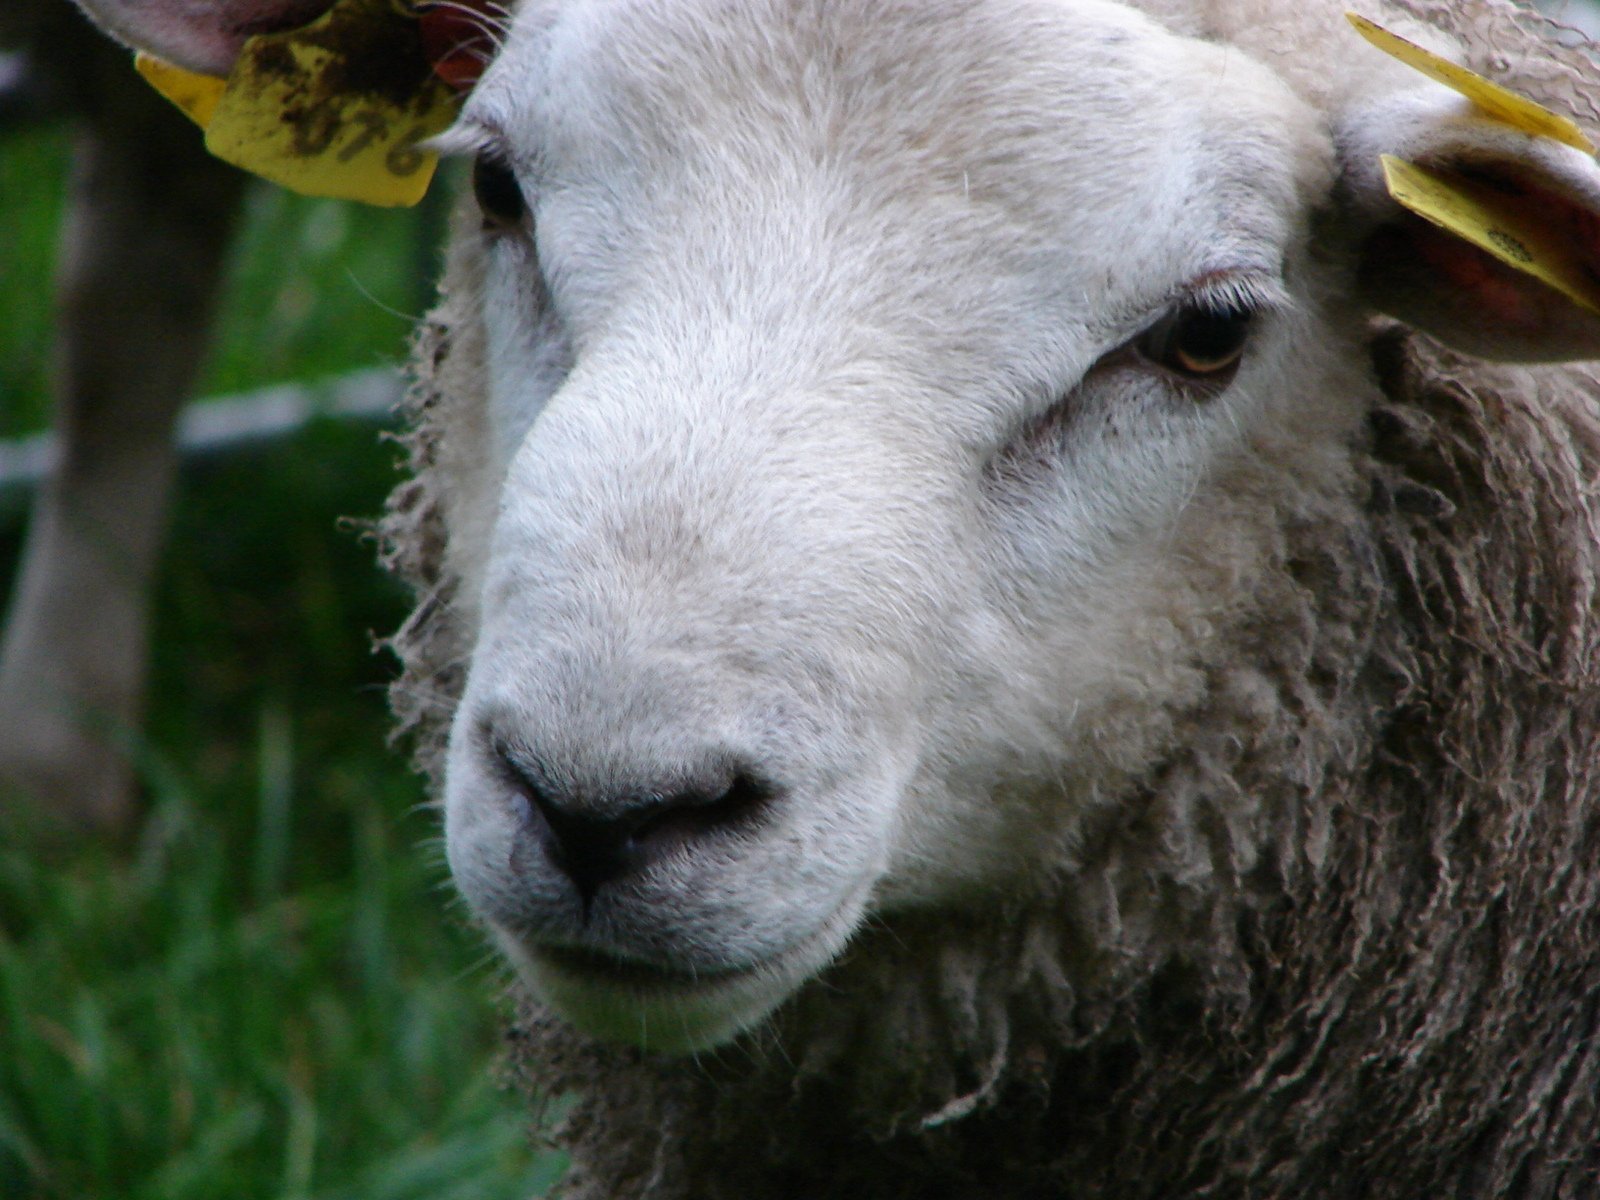 closeup of head of sheep on a green grassy field